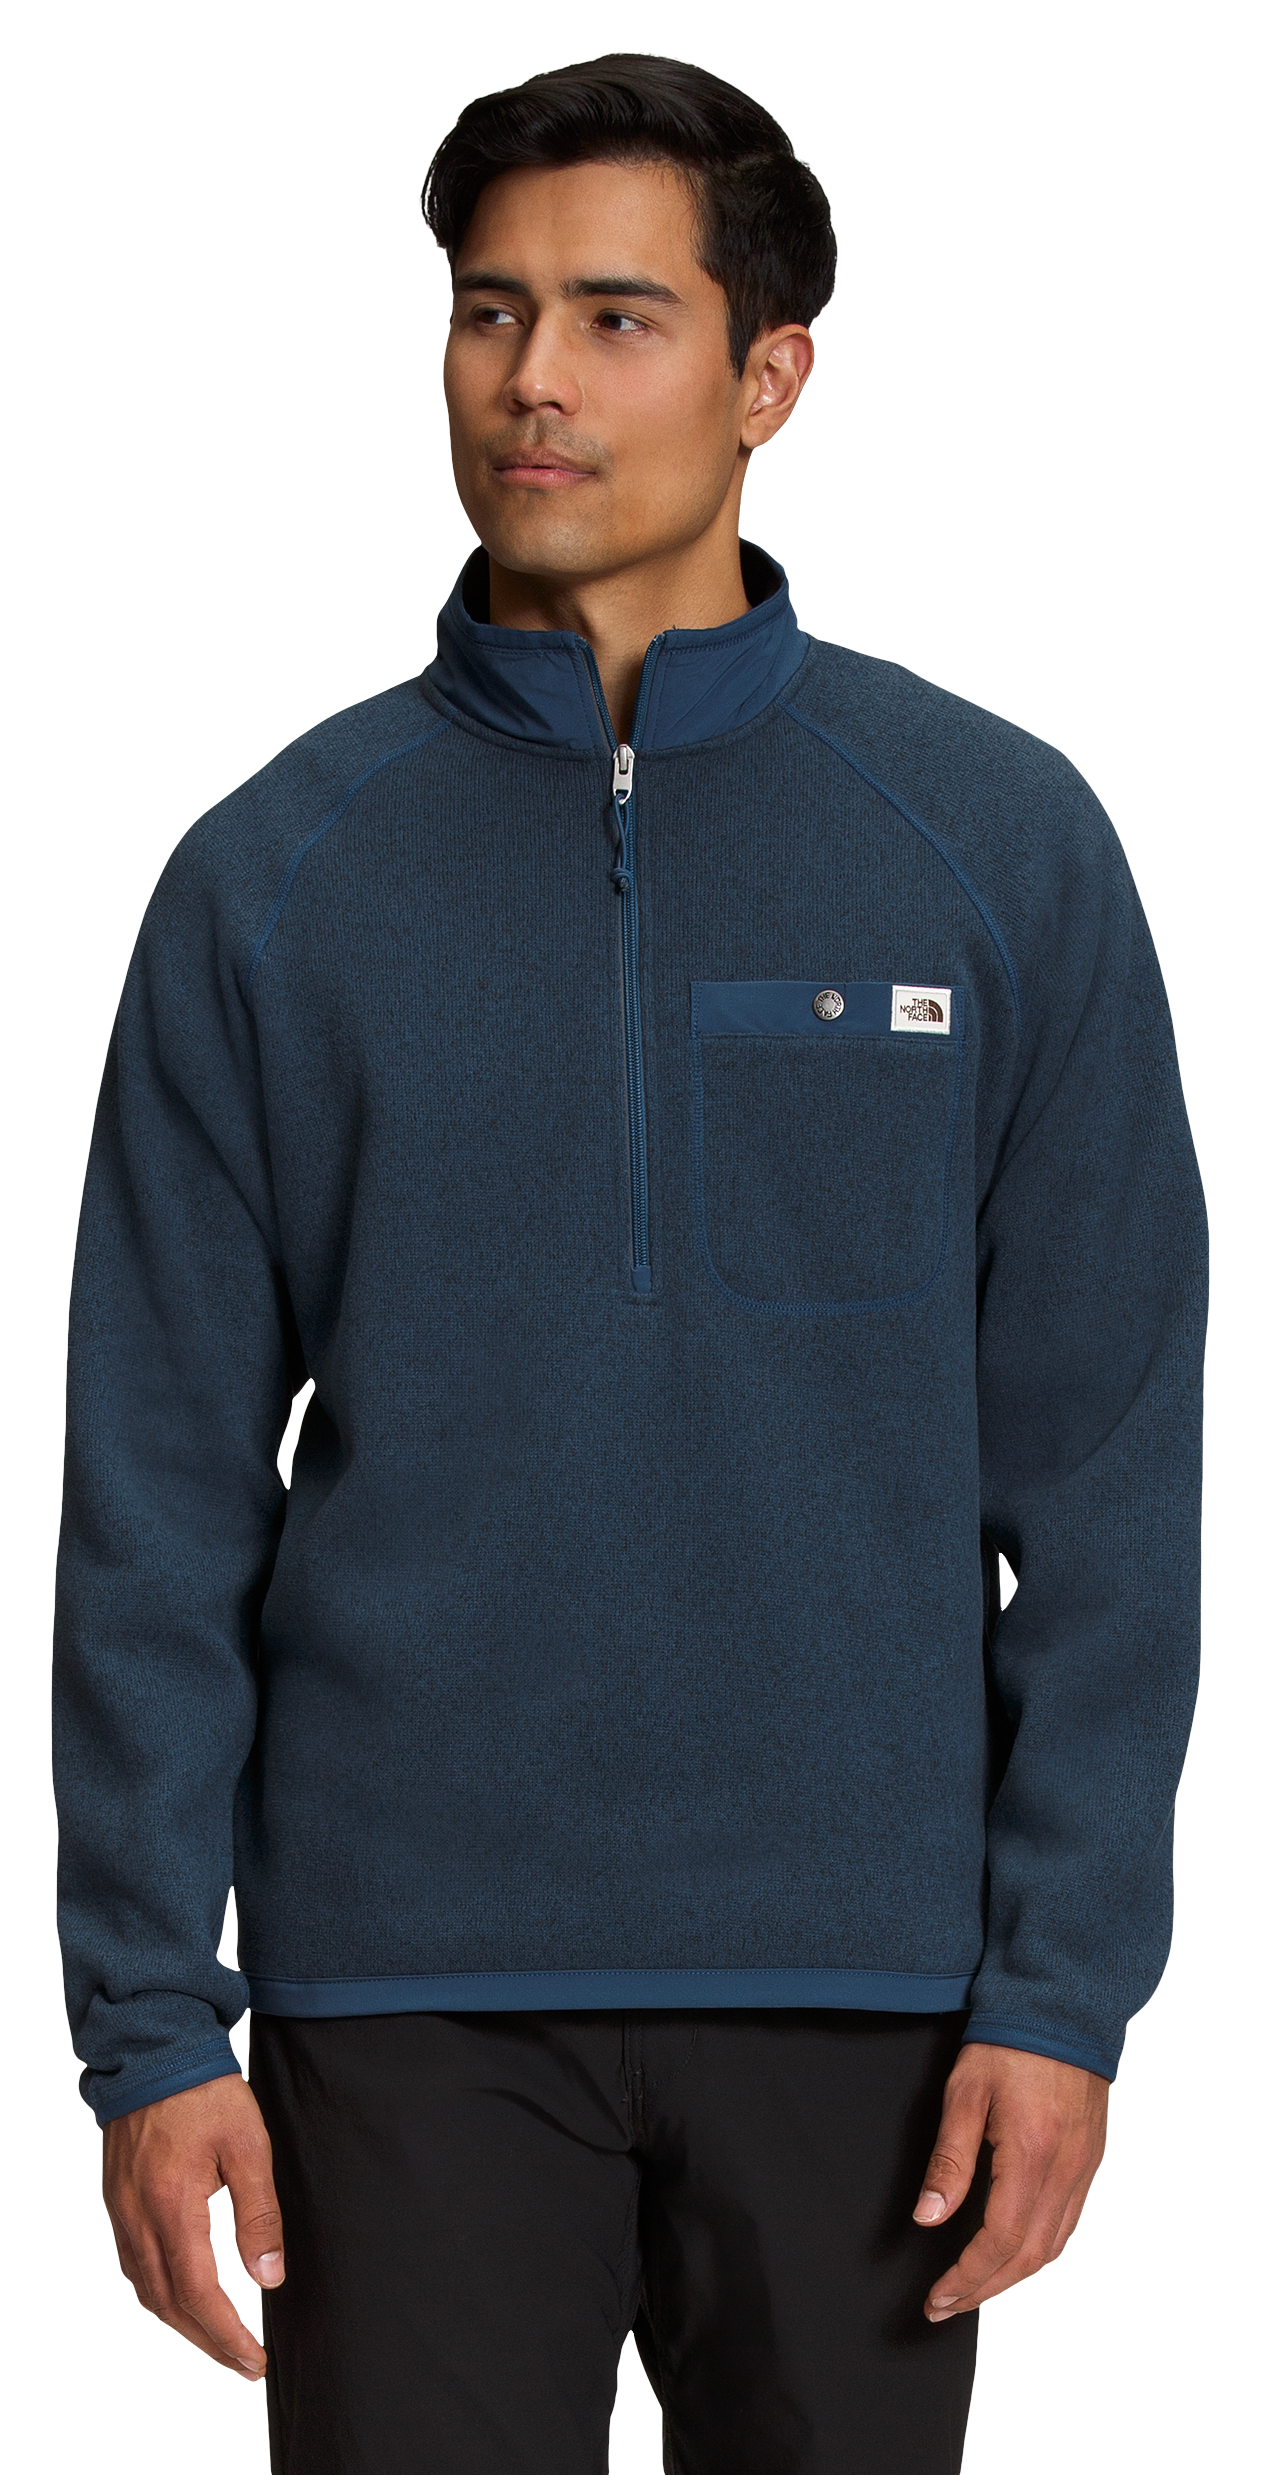 The North Face Gordon Lyons Quarter-Zip Long-Sleeve Pullover for Men - Shady Blue Heather - L